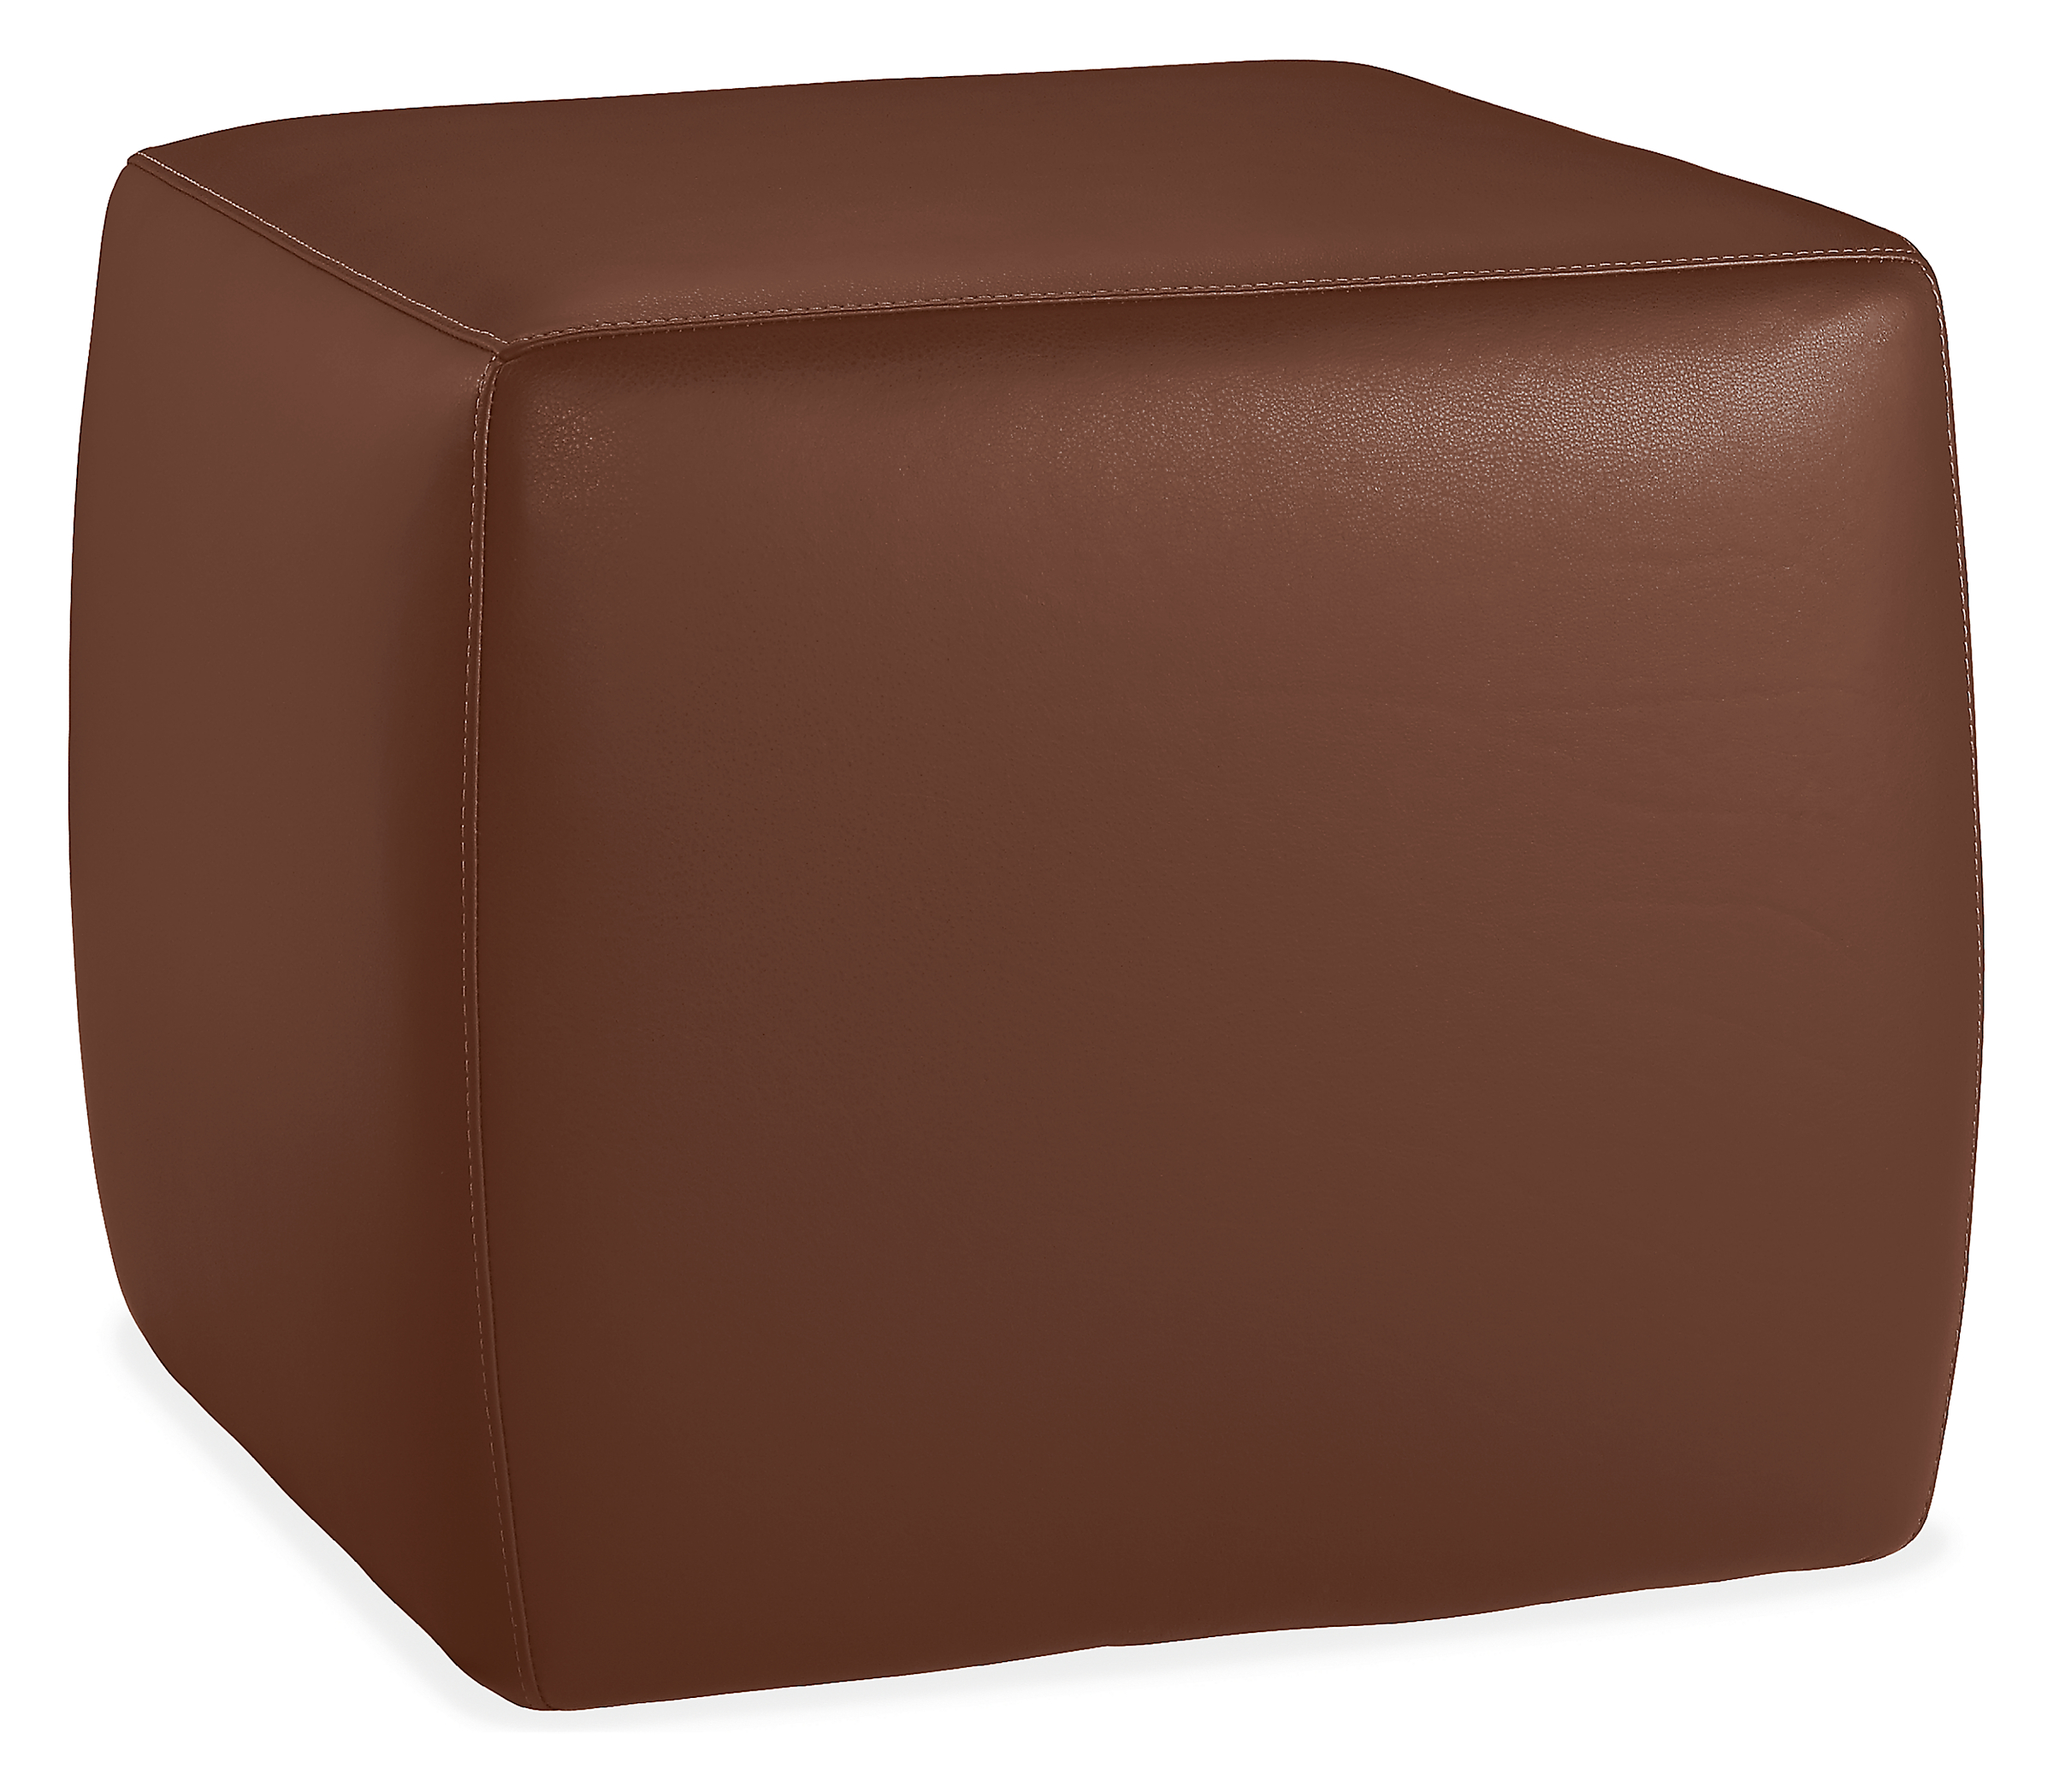 Lind 21w 21d 18h Square Ottoman in Lecco Cognac Leather